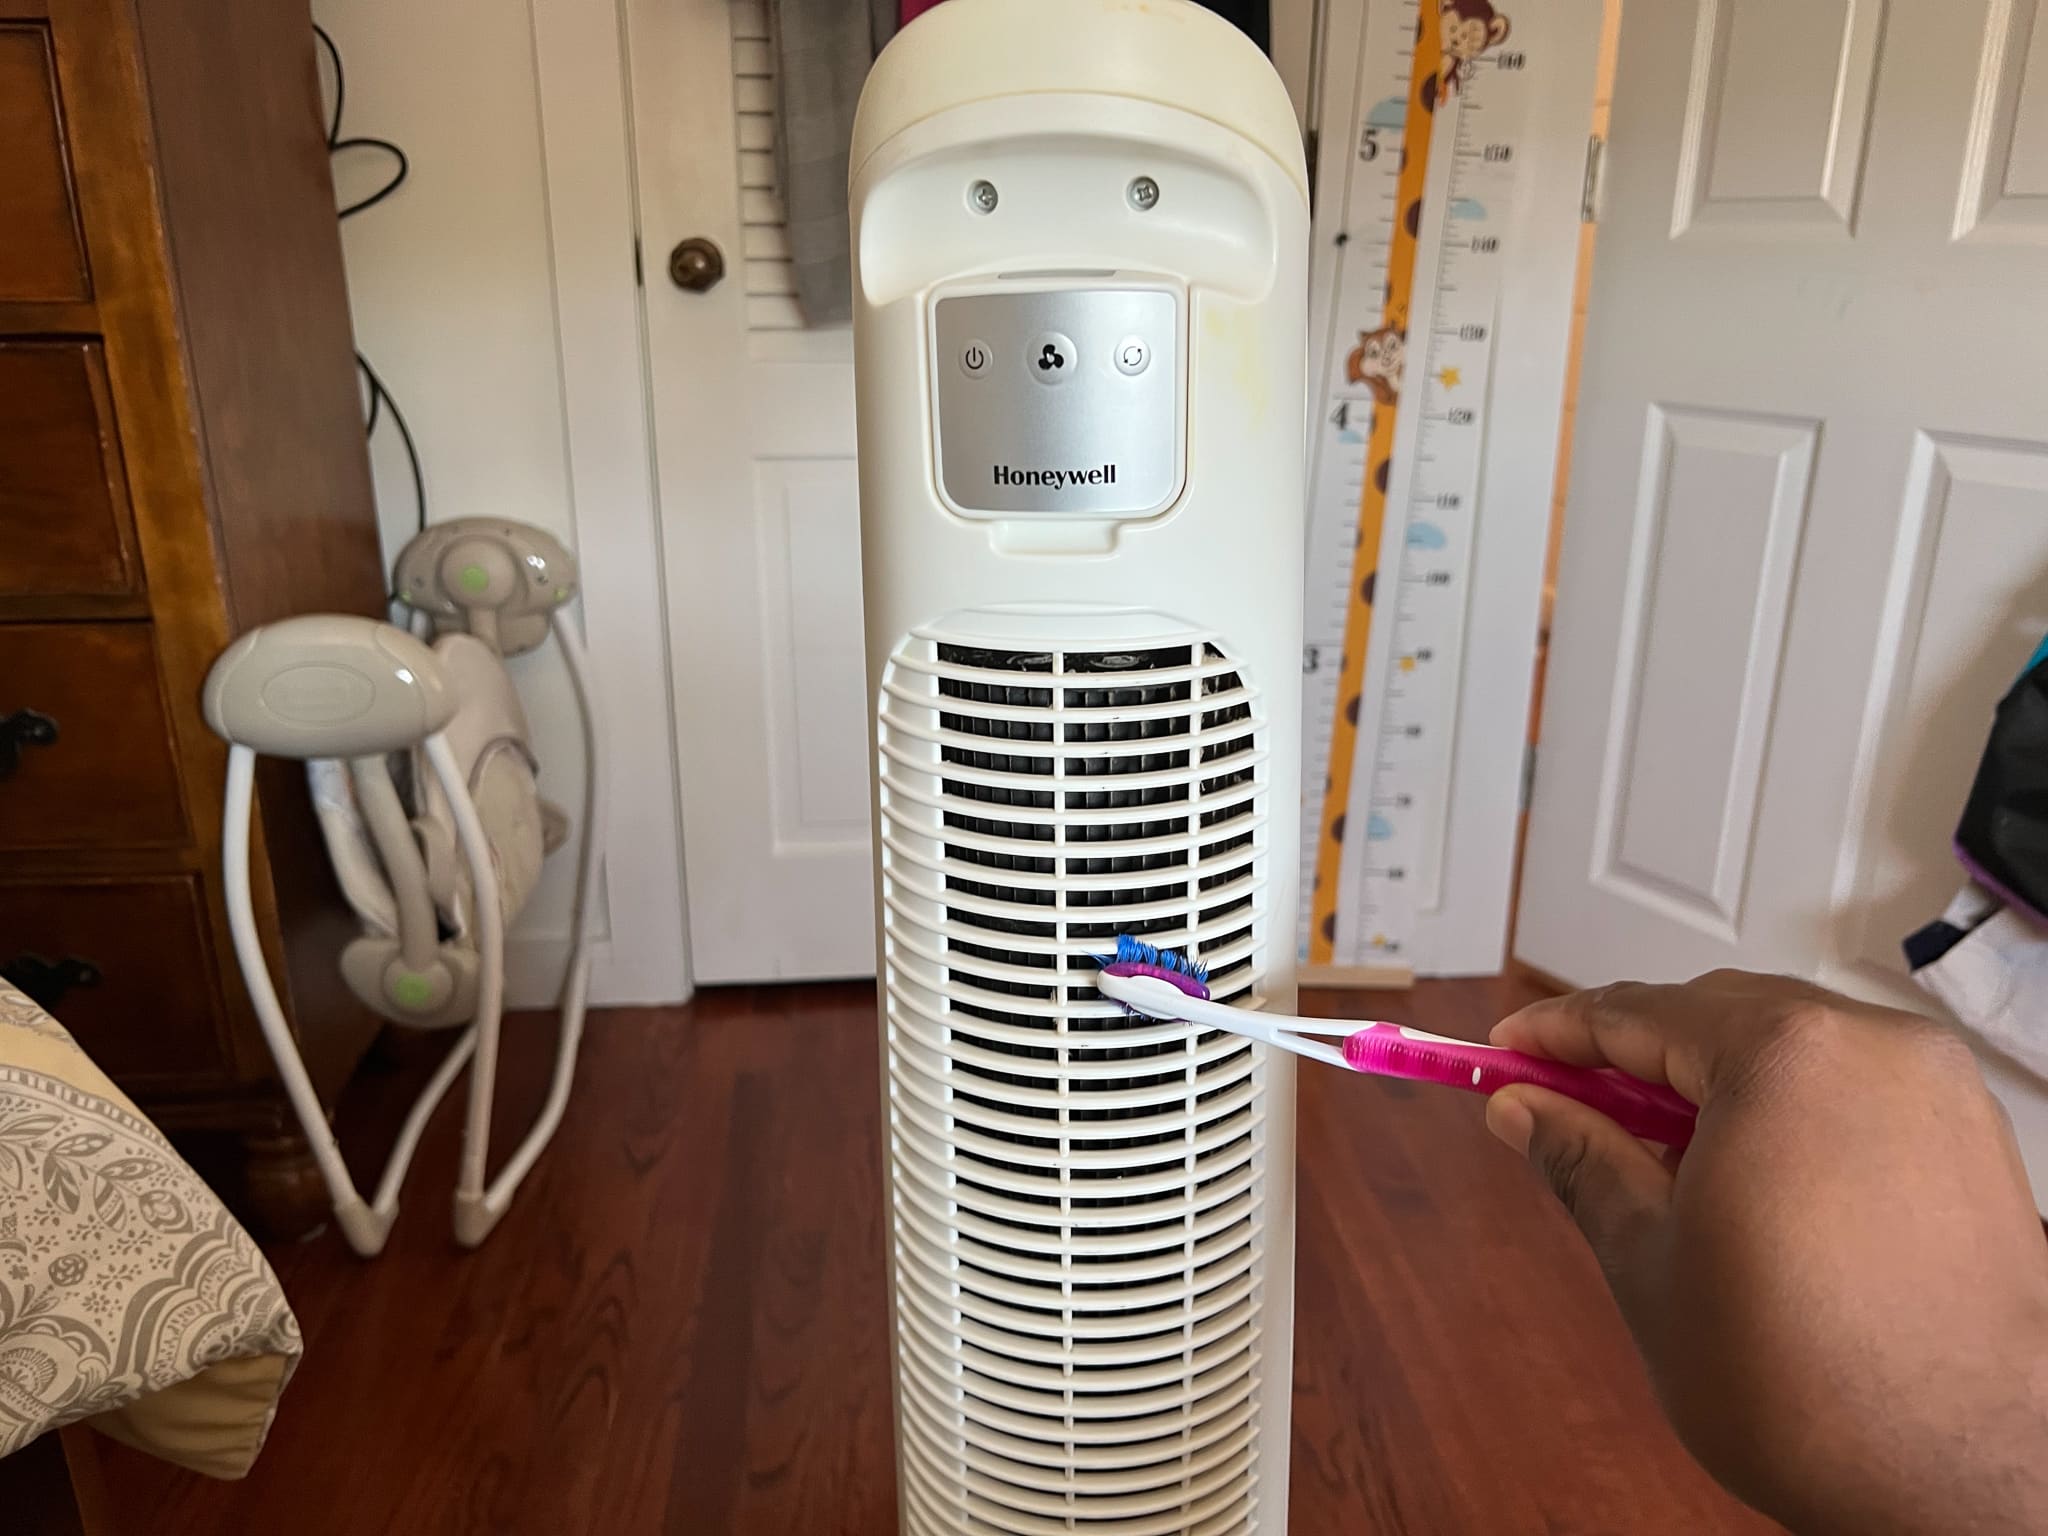 quietset honeywell tower fan cleaning with toothbrush